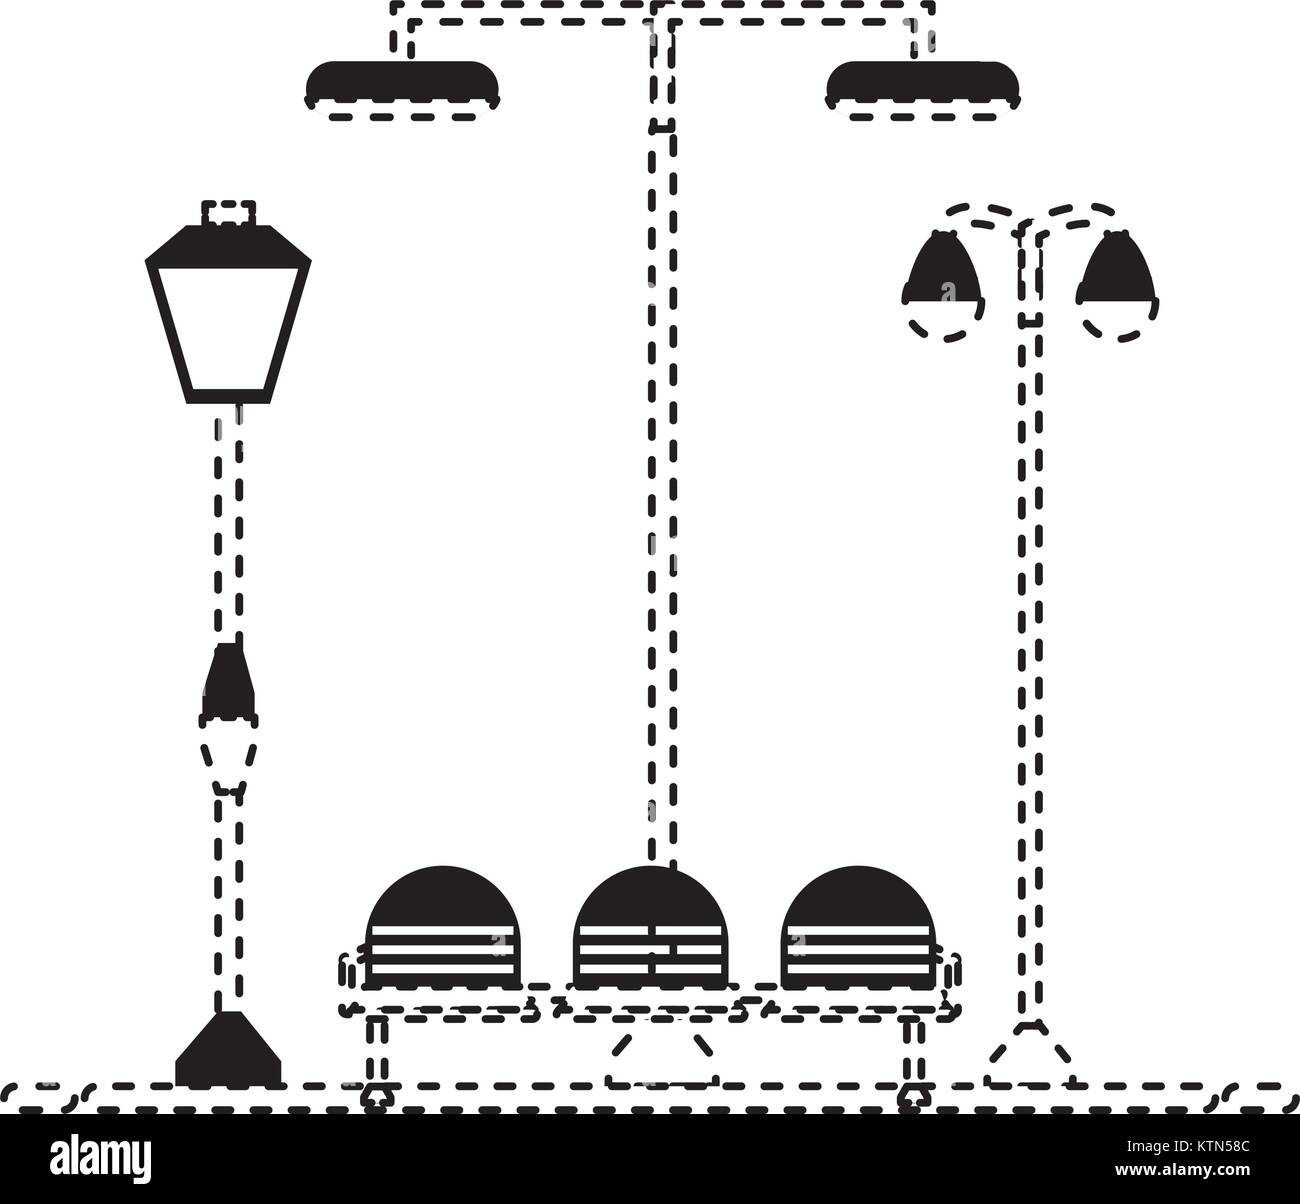 Ornate street lamps Stock Vector Images - Alamy